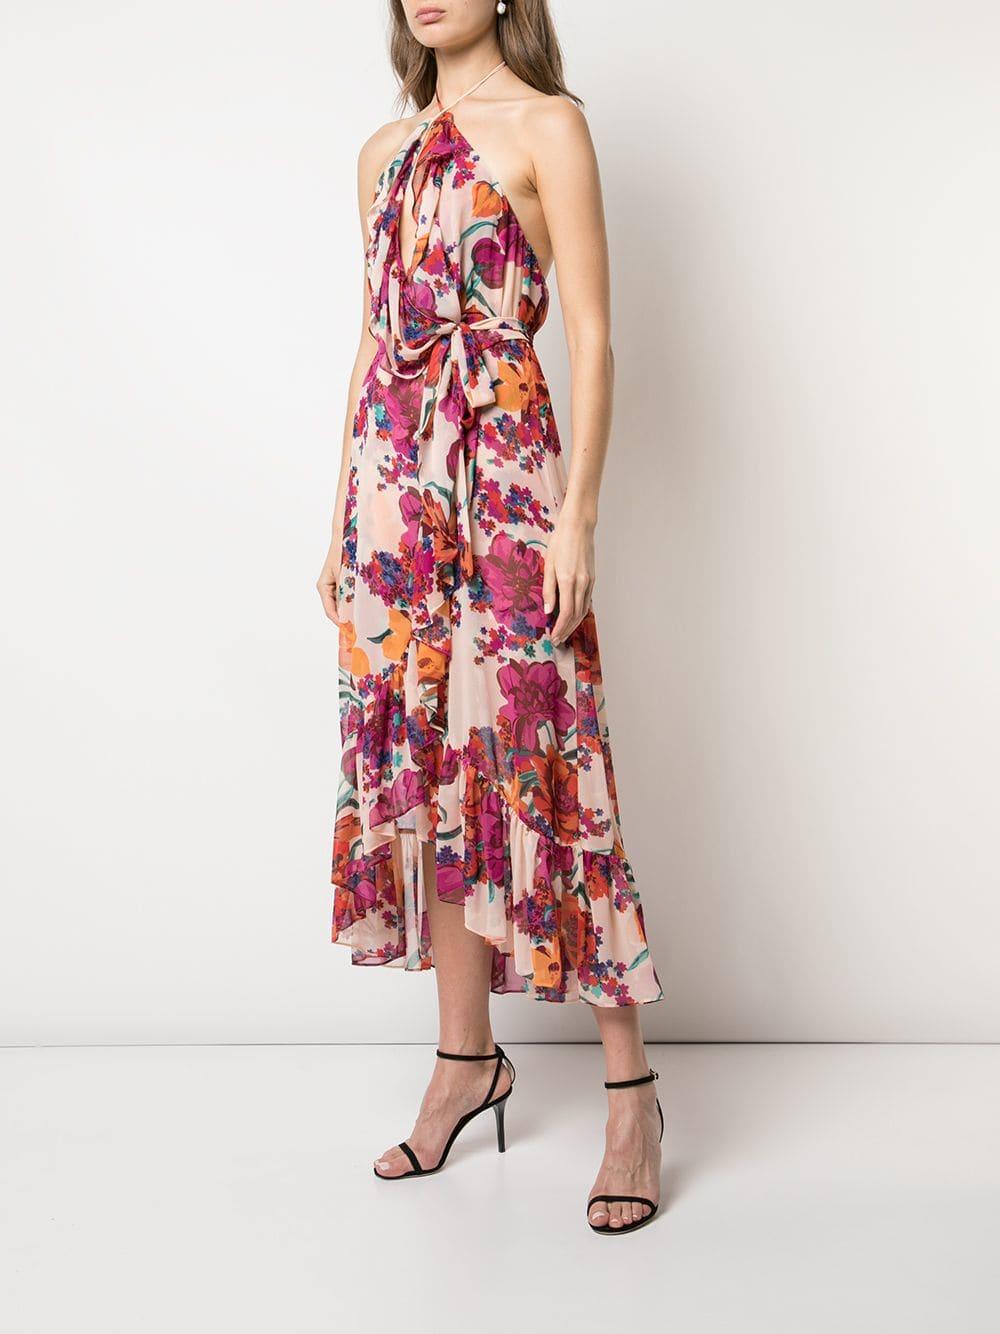 MISA Floral Draped Dress in Pink - Lyst